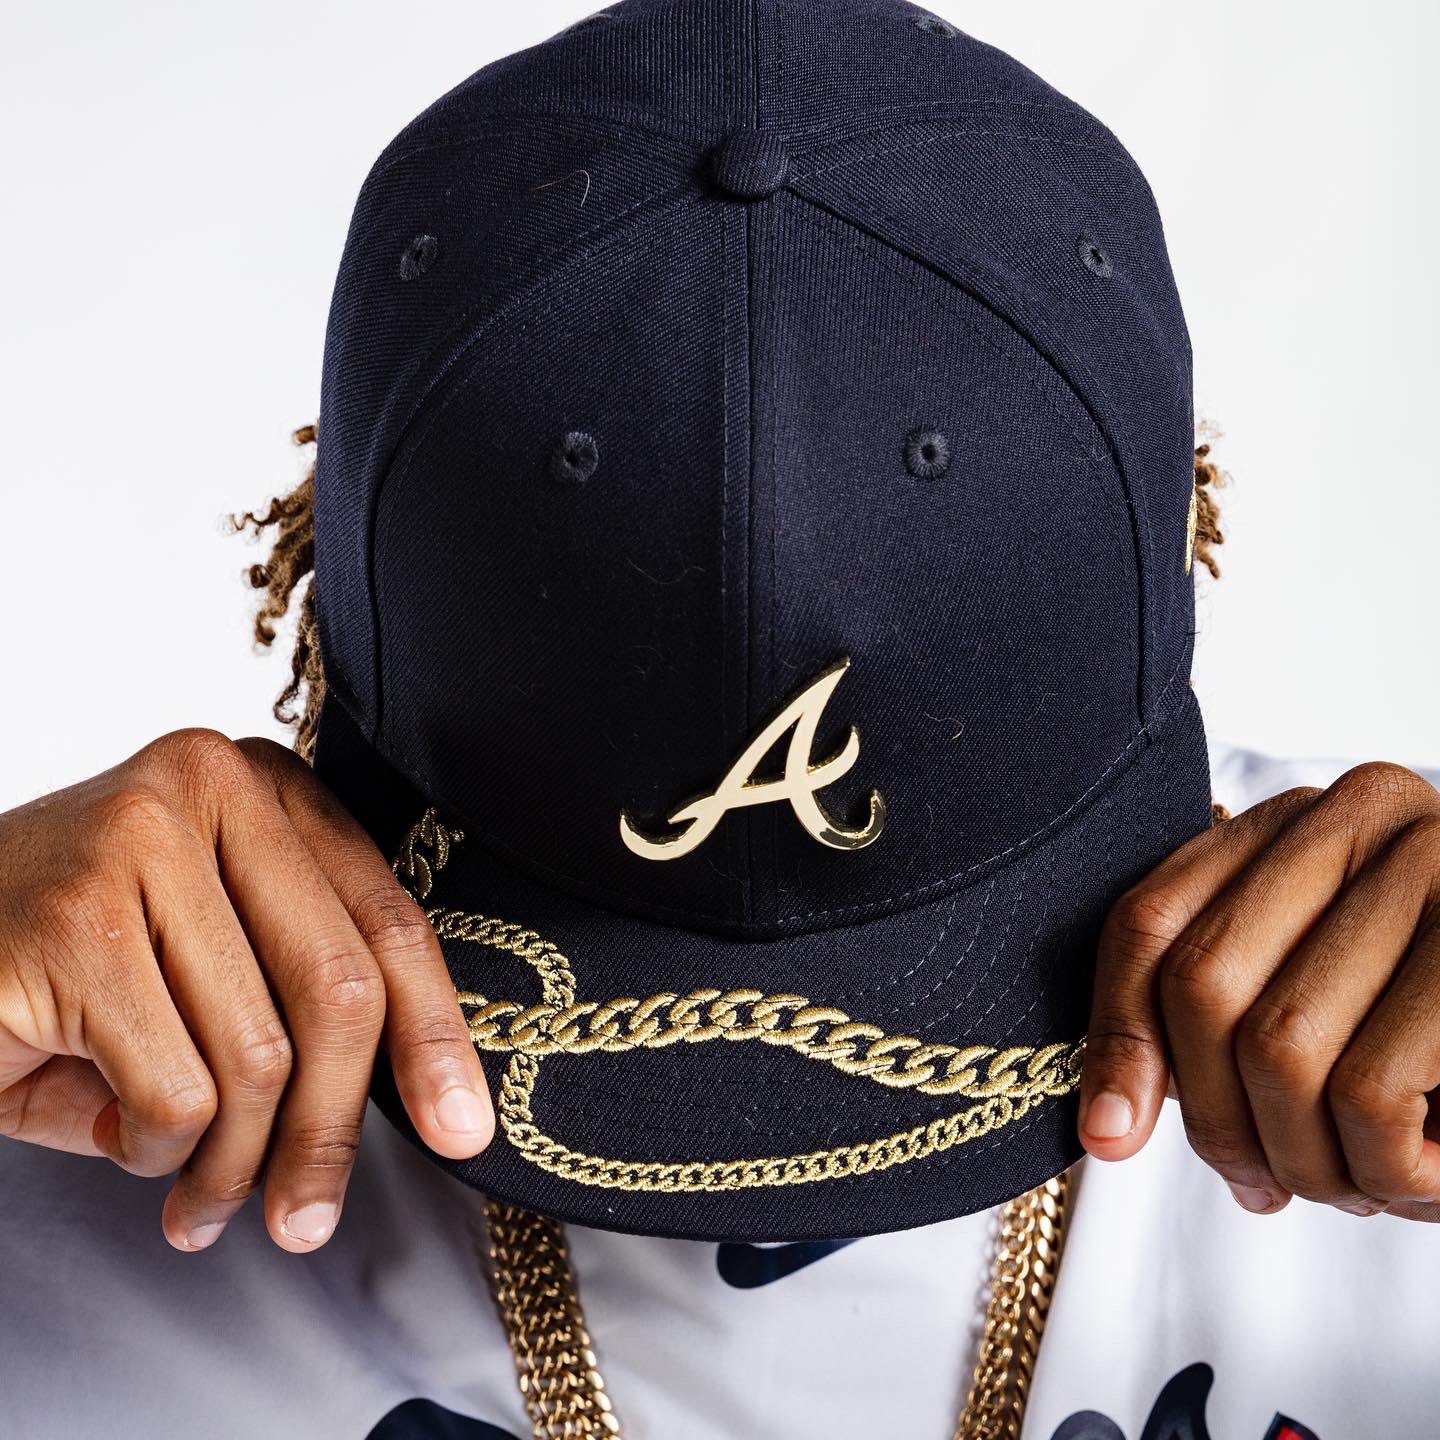 Braves Retail - The @braves Clubhouse Store Pop-Up Shop at @truistpark will  be open until 7pm today and 12-6pm tomorrow! Stop by to check out our NEW  tees, caps & more!